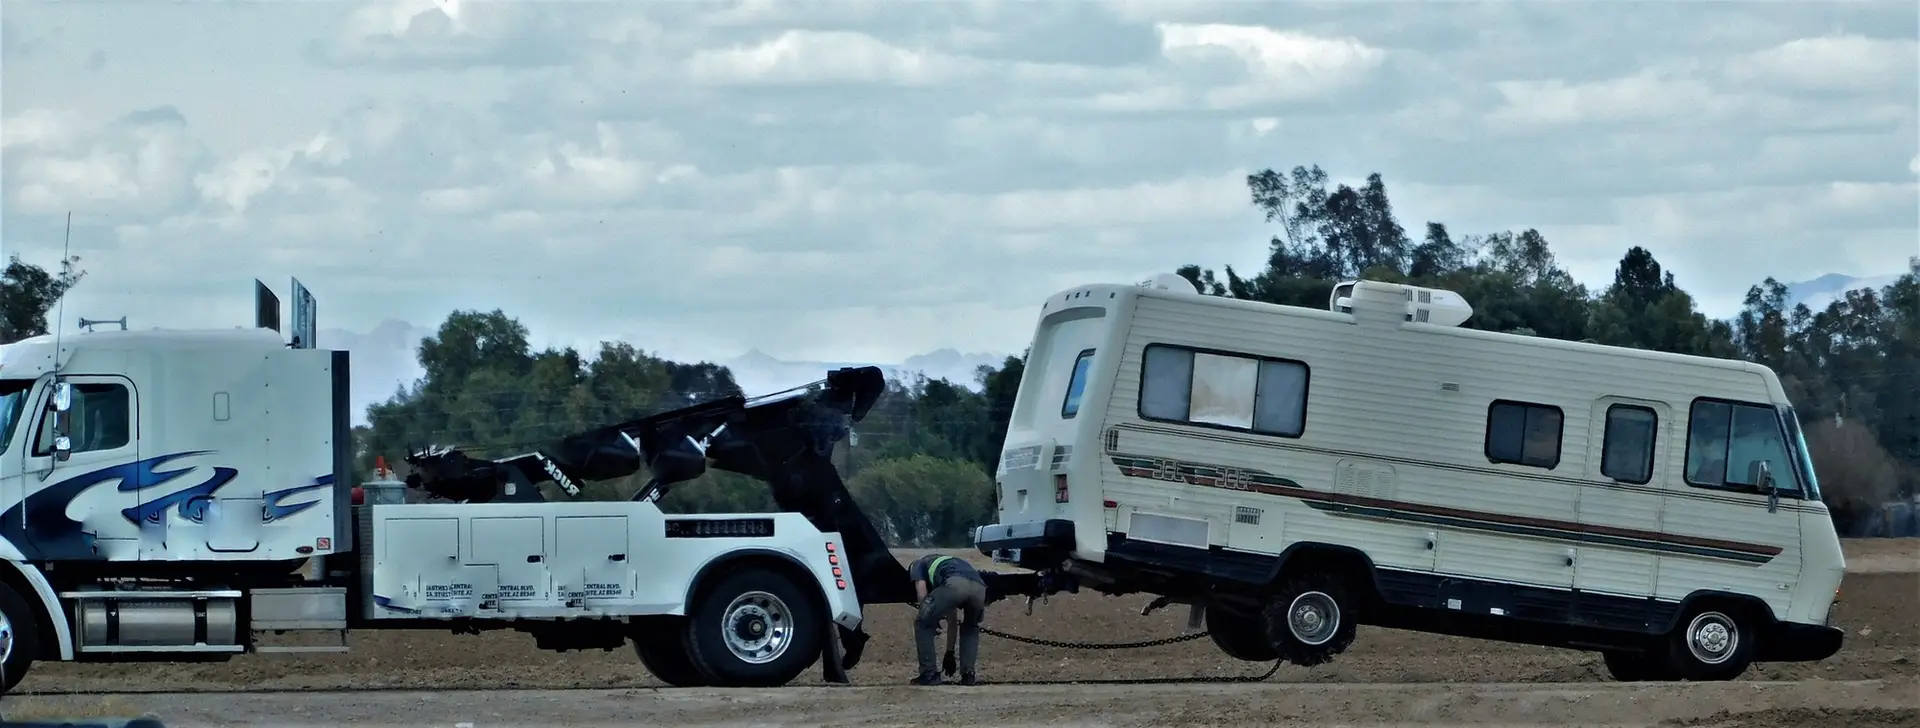 Wheel Lift Tow Truck- Everything You Need To Know Tow Truck! Wrecker Towing a Motorhome!